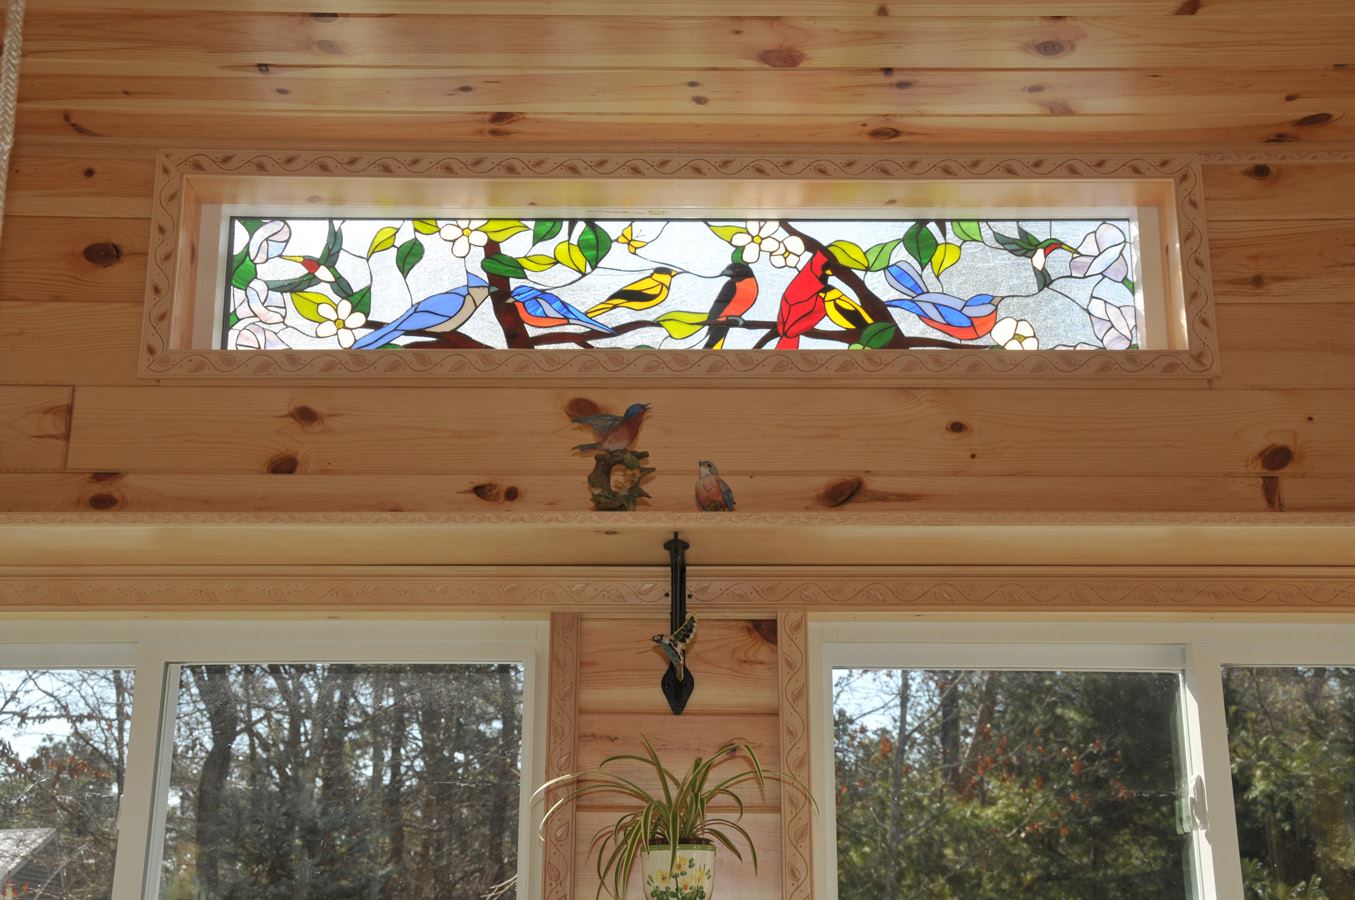 So Colorful! The Lovely Stained Glass Bird Gathering